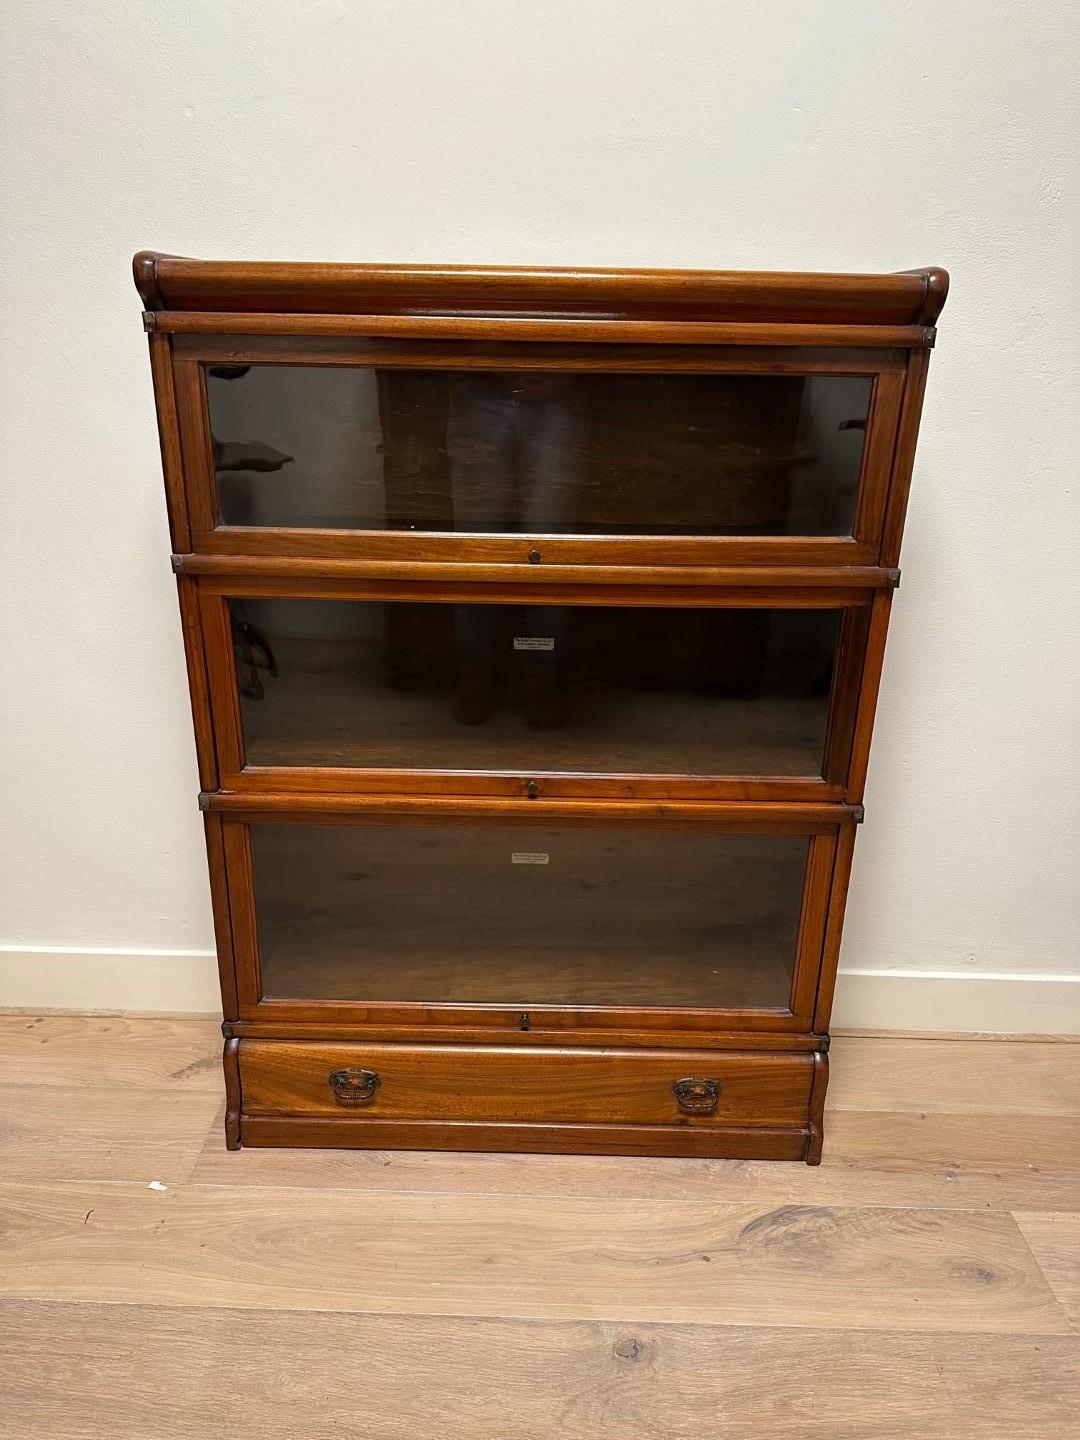 Beautiful antique Globe Wernicke bookcase in good and completely original condition. Consisting of 3 stackable parts with a drawer in the plinth.

Origin: England
Period: Approx. 1900
Size: 86.5cm x 29cm x h.120cm